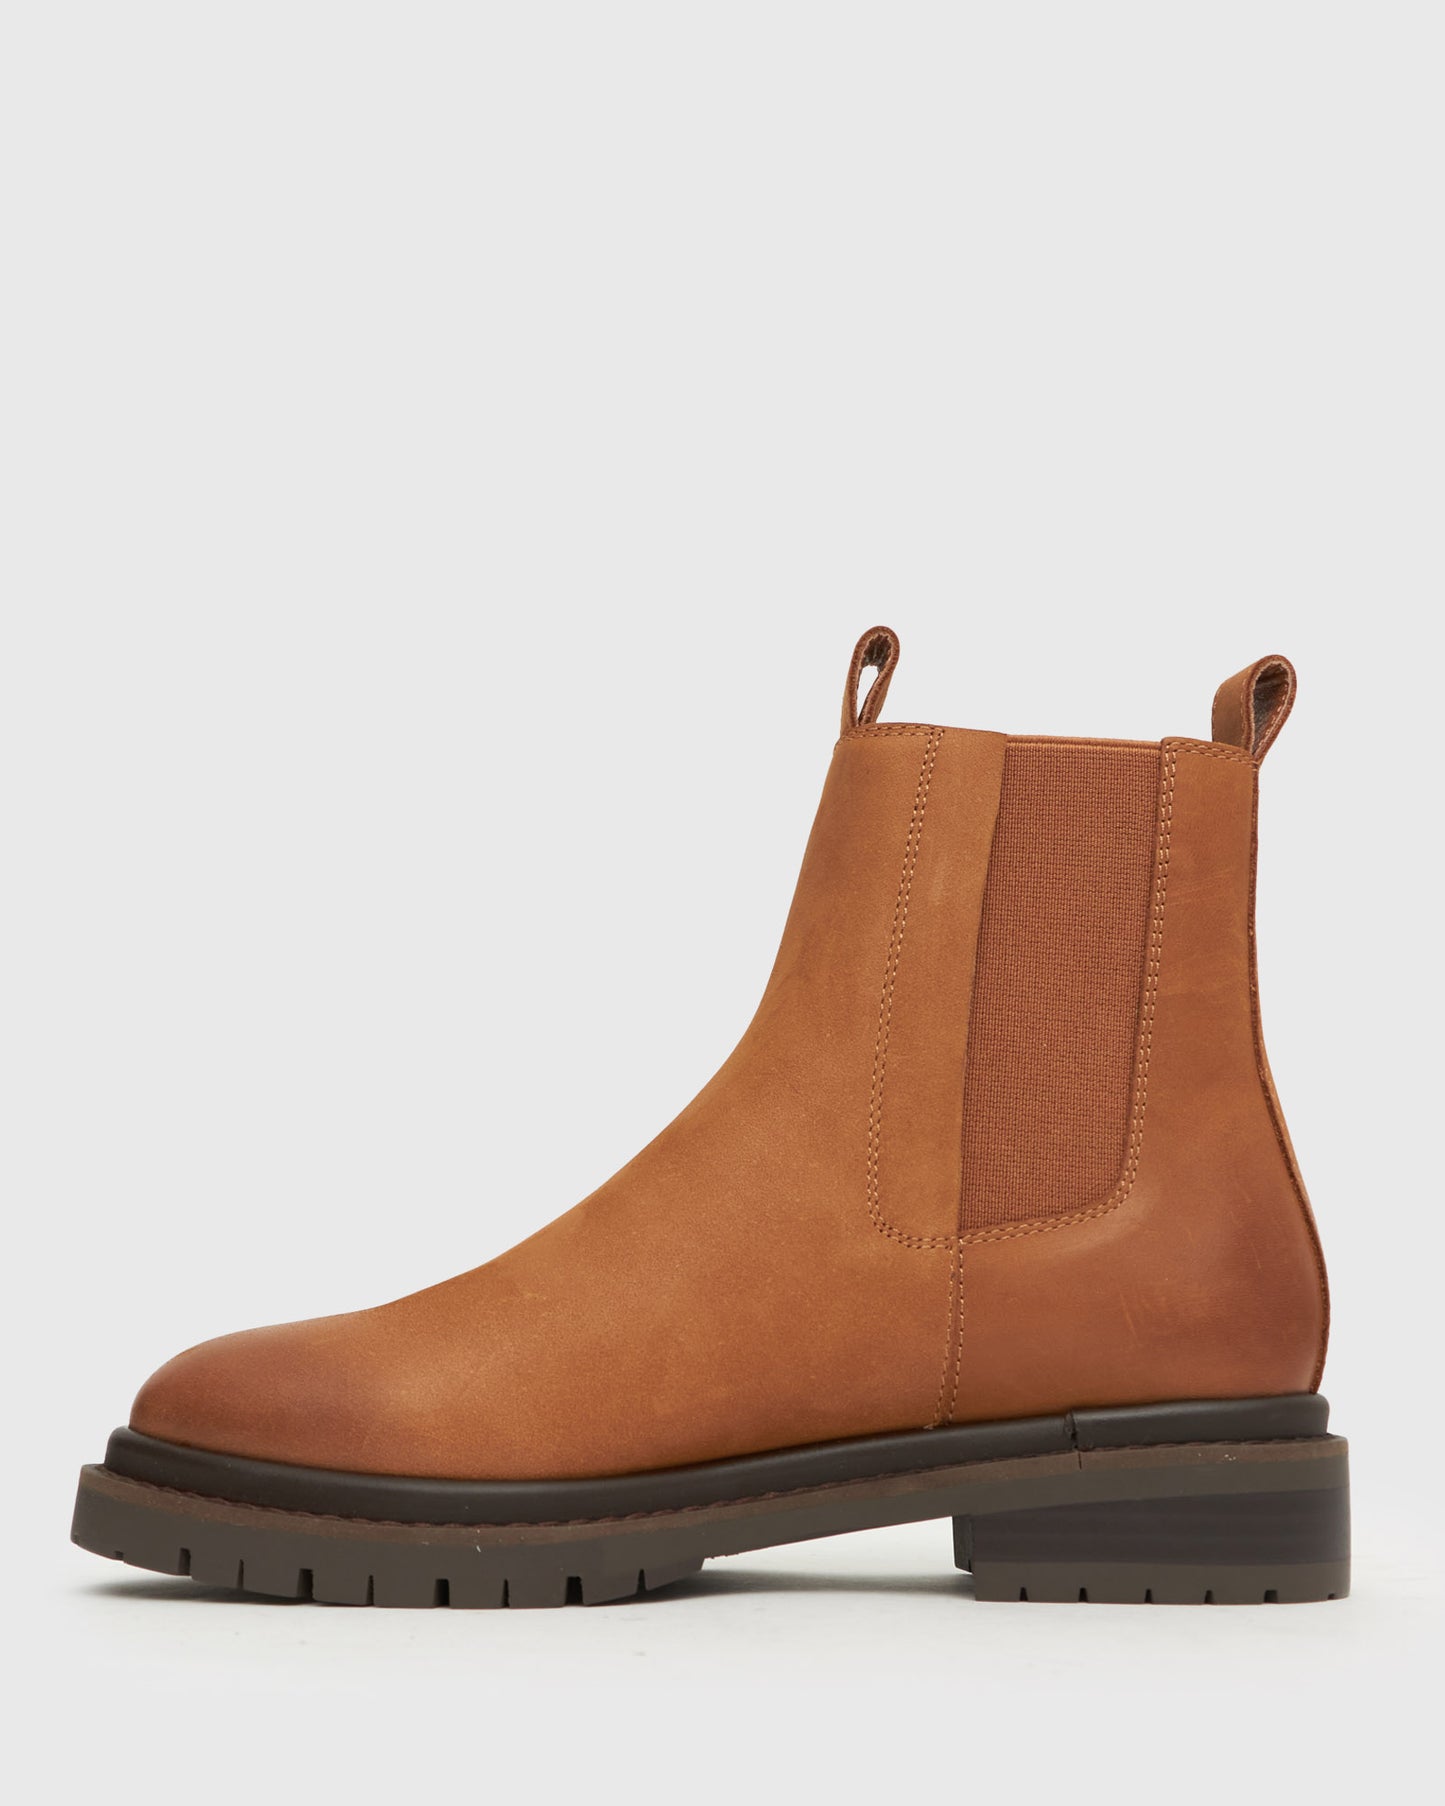 IVY Flat Leather Chelsea Boots